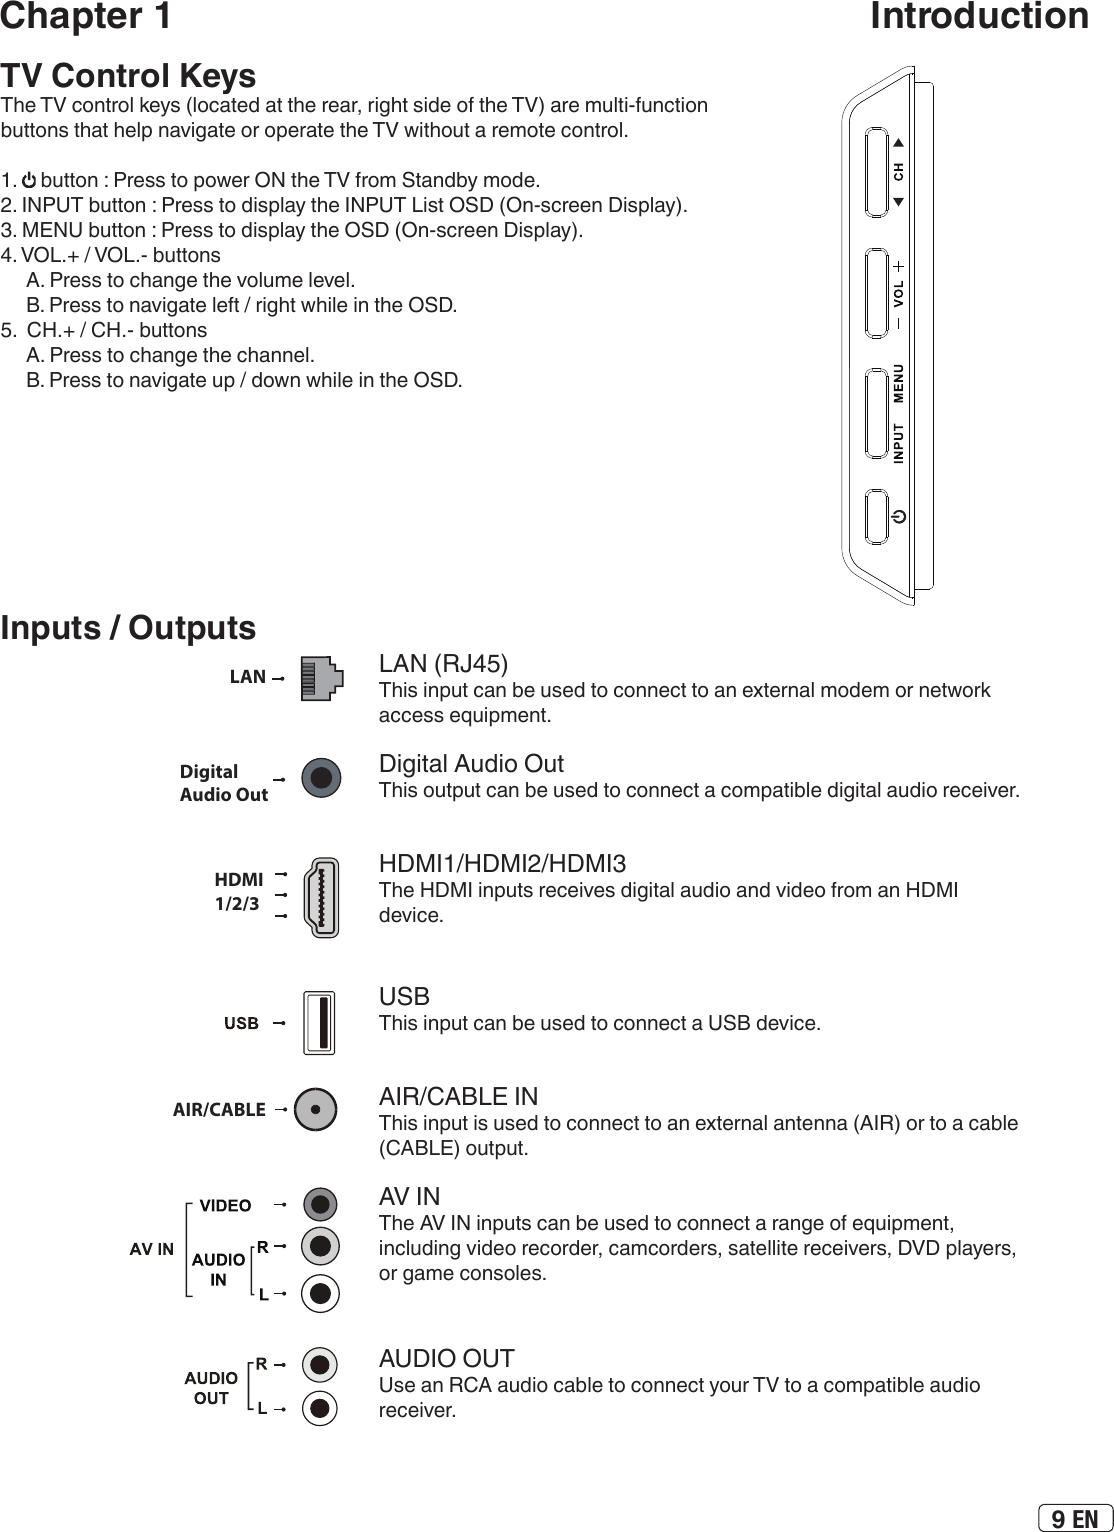 9 ENChapter 1                                                                     IntroductionLANDigital Audio OutHDMI 1/2/3AIR/CABLELAN (RJ45)This input can be used to connect to an external modem or network access equipment.Digital Audio OutThis output can be used to connect a compatible digital audio receiver.HDMI1/HDMI2/HDMI3 The HDMI inputs receives digital audio and video from an HDMI device. USBThis input can be used to connect a USB device.AIR/CABLE INThis input is used to connect to an external antenna (AIR) or to a cable (CABLE) output.AV INThe AV IN inputs can be used to connect a range of equipment, including video recorder, camcorders, satellite receivers, DVD players, or game consoles. AUDIO OUTUse an RCA audio cable to connect your TV to a compatible audio receiver.TV Control KeysThe TV control keys (located at the rear, right side of the TV) are multi-function buttons that help navigate or operate the TV without a remote control.1.   button : Press to power ON the TV from Standby mode.2. INPUT button : Press to display the INPUT List OSD (On-screen Display).3. MENU button : Press to display the OSD (On-screen Display).4. VOL.+ / VOL.- buttons     A. Press to change the volume level.     B. Press to navigate left / right while in the OSD.5.  CH.+ / CH.- buttons     A. Press to change the channel.     B. Press to navigate up / down while in the OSD.Inputs / Outputs